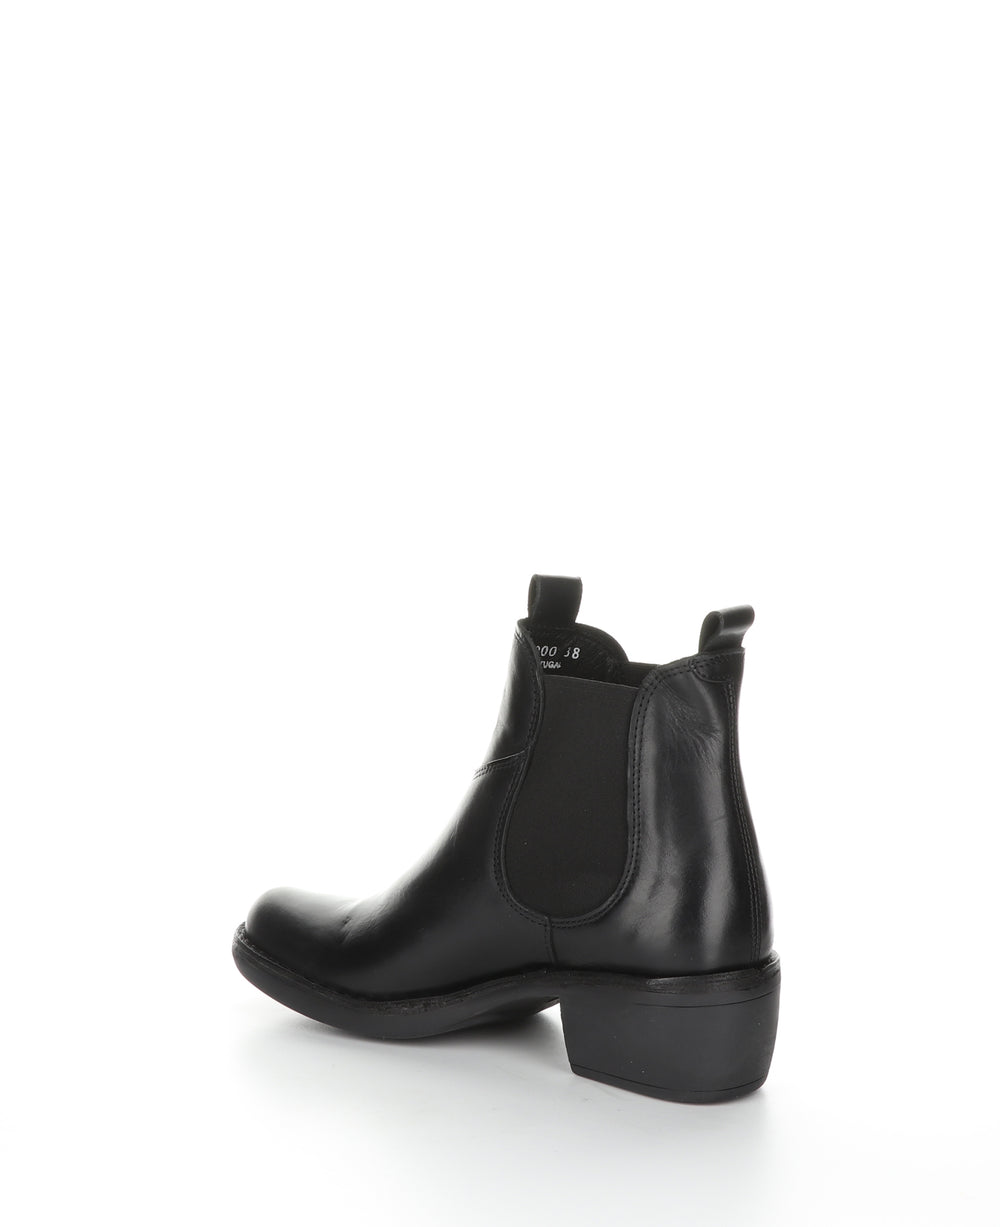 MEME030FLY Black Round Toe Ankle Boots|MEME030FLY Bottines à Bout Rond in Noir